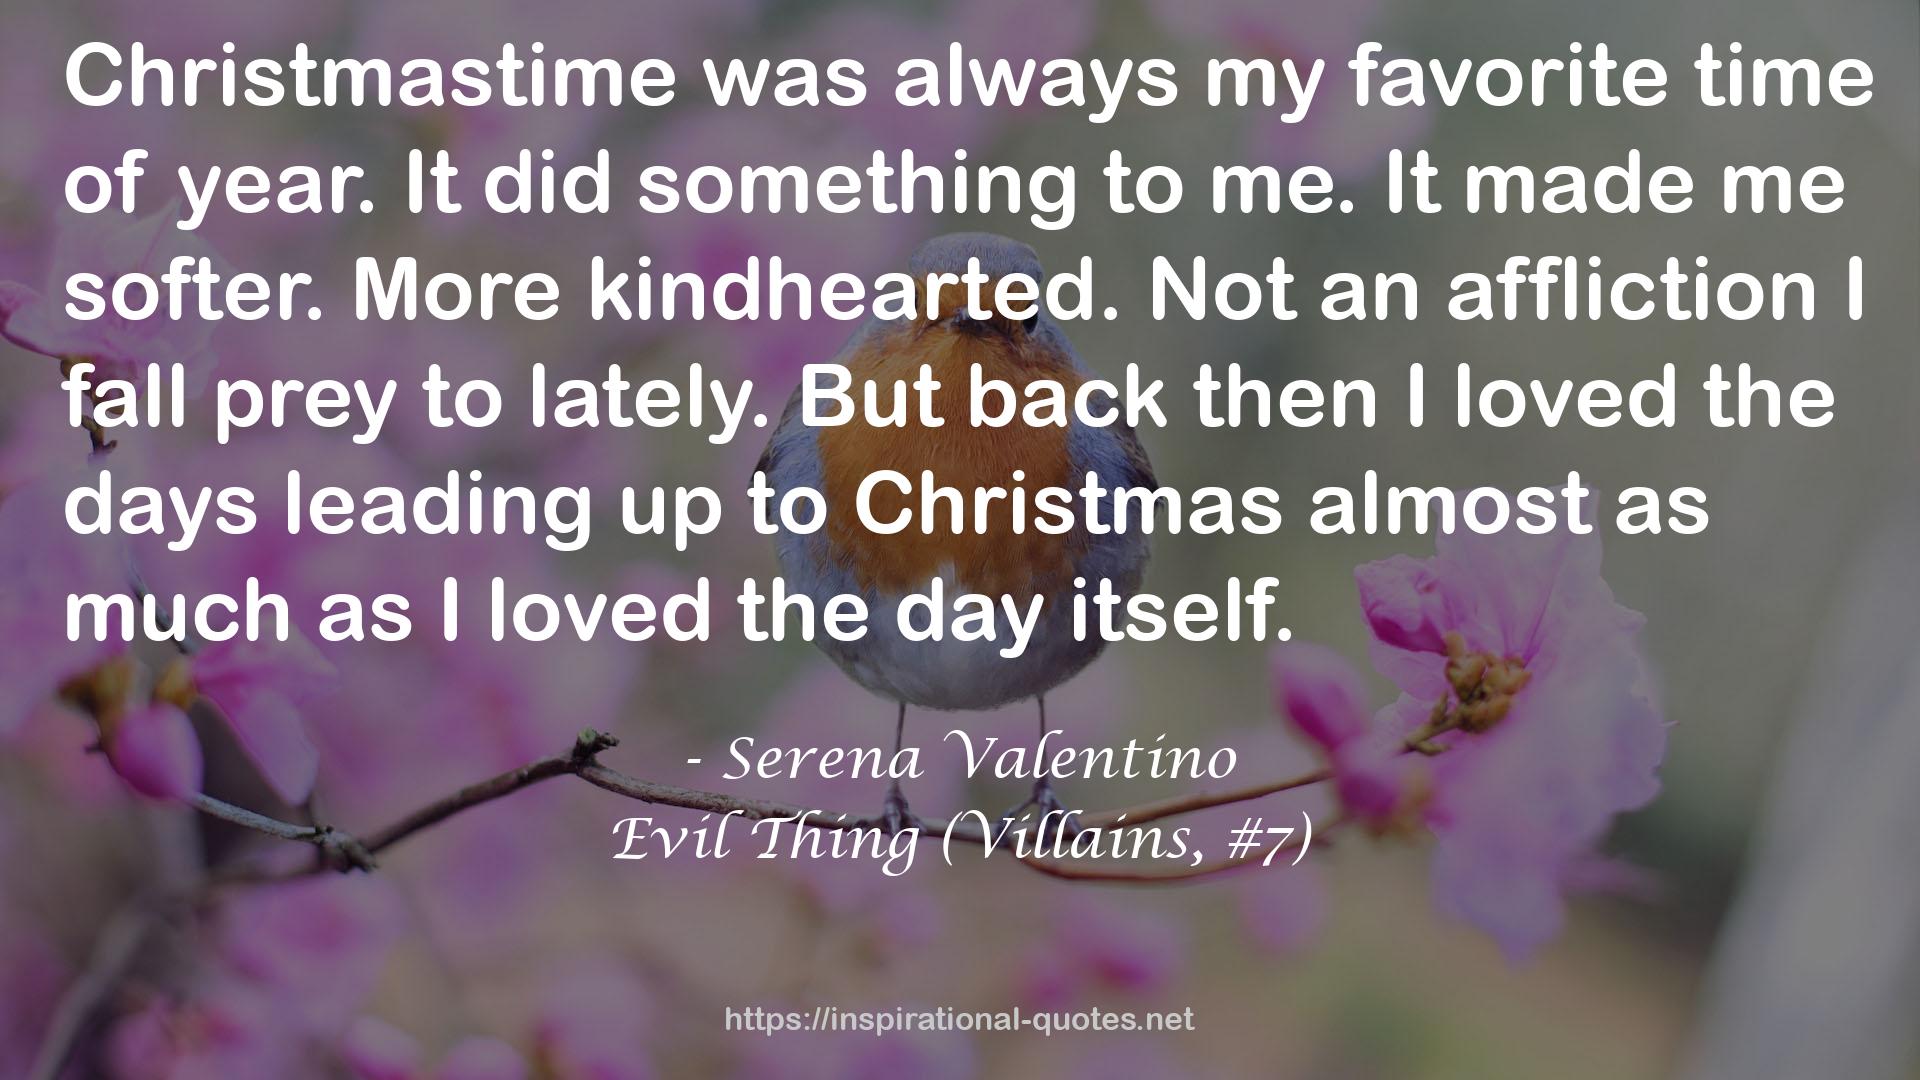 Evil Thing (Villains, #7) QUOTES